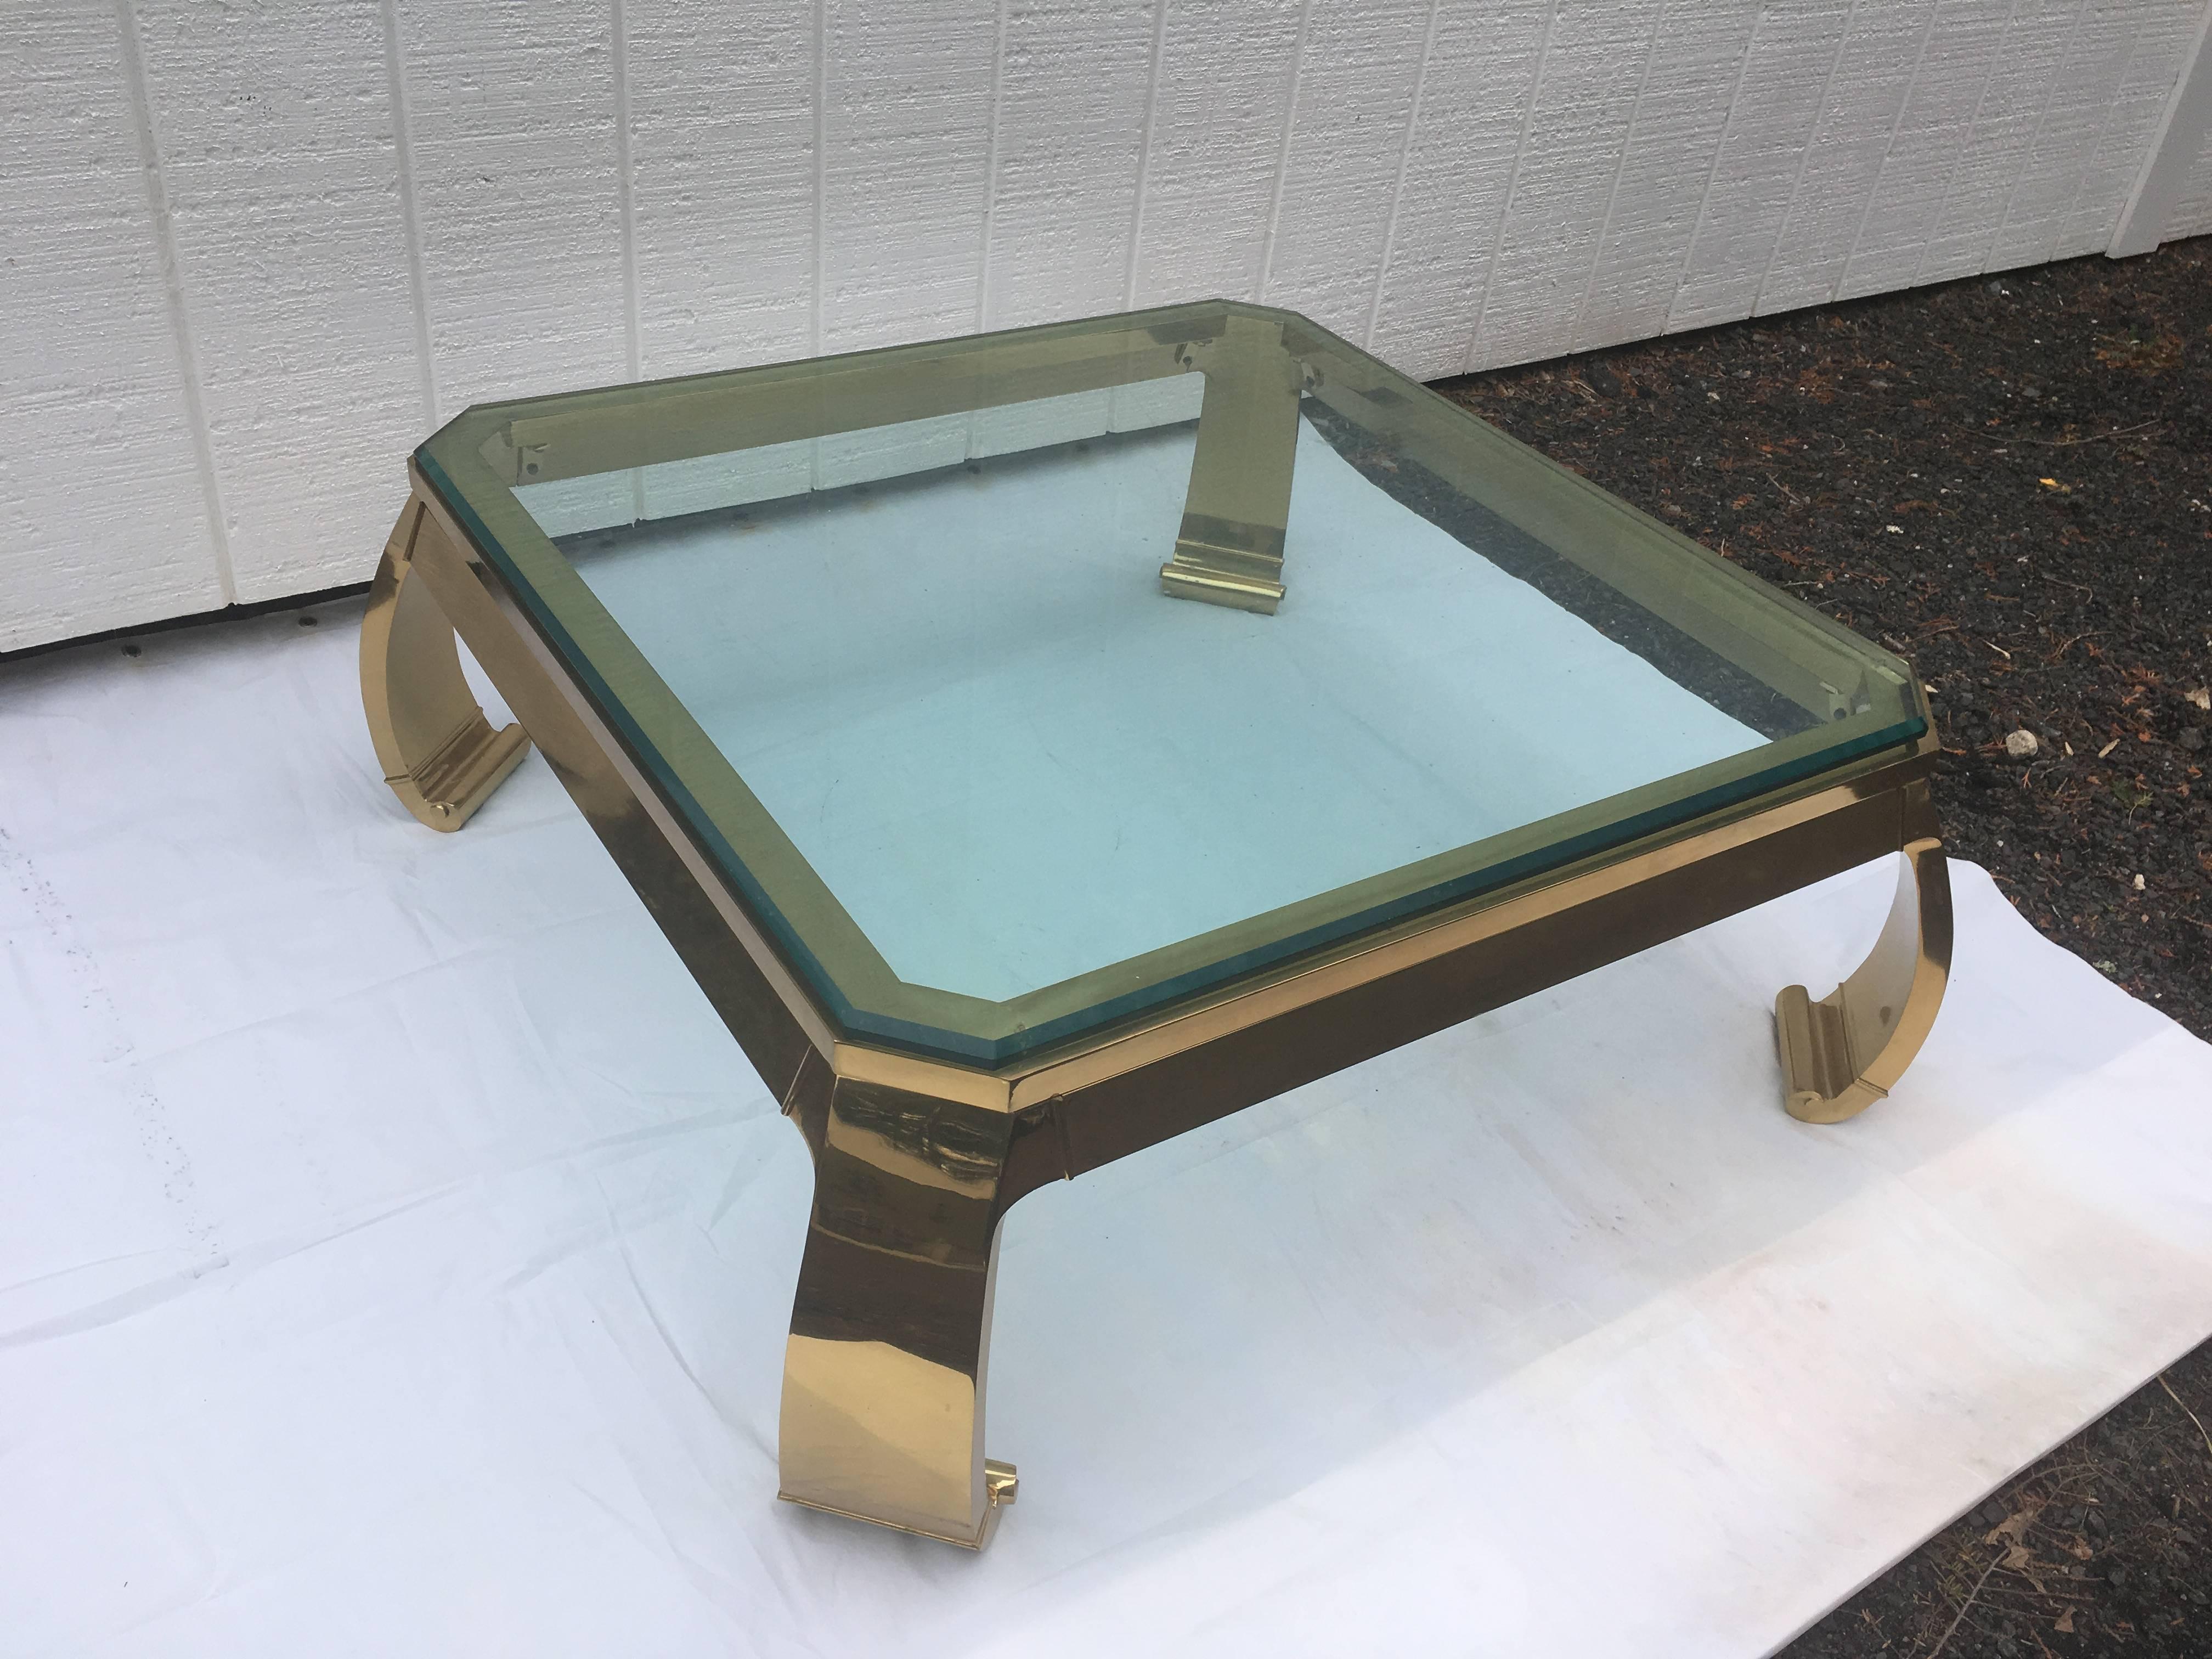  Asian Inspired Brass and Glass Coffee Table attributed to Mastercraft 2